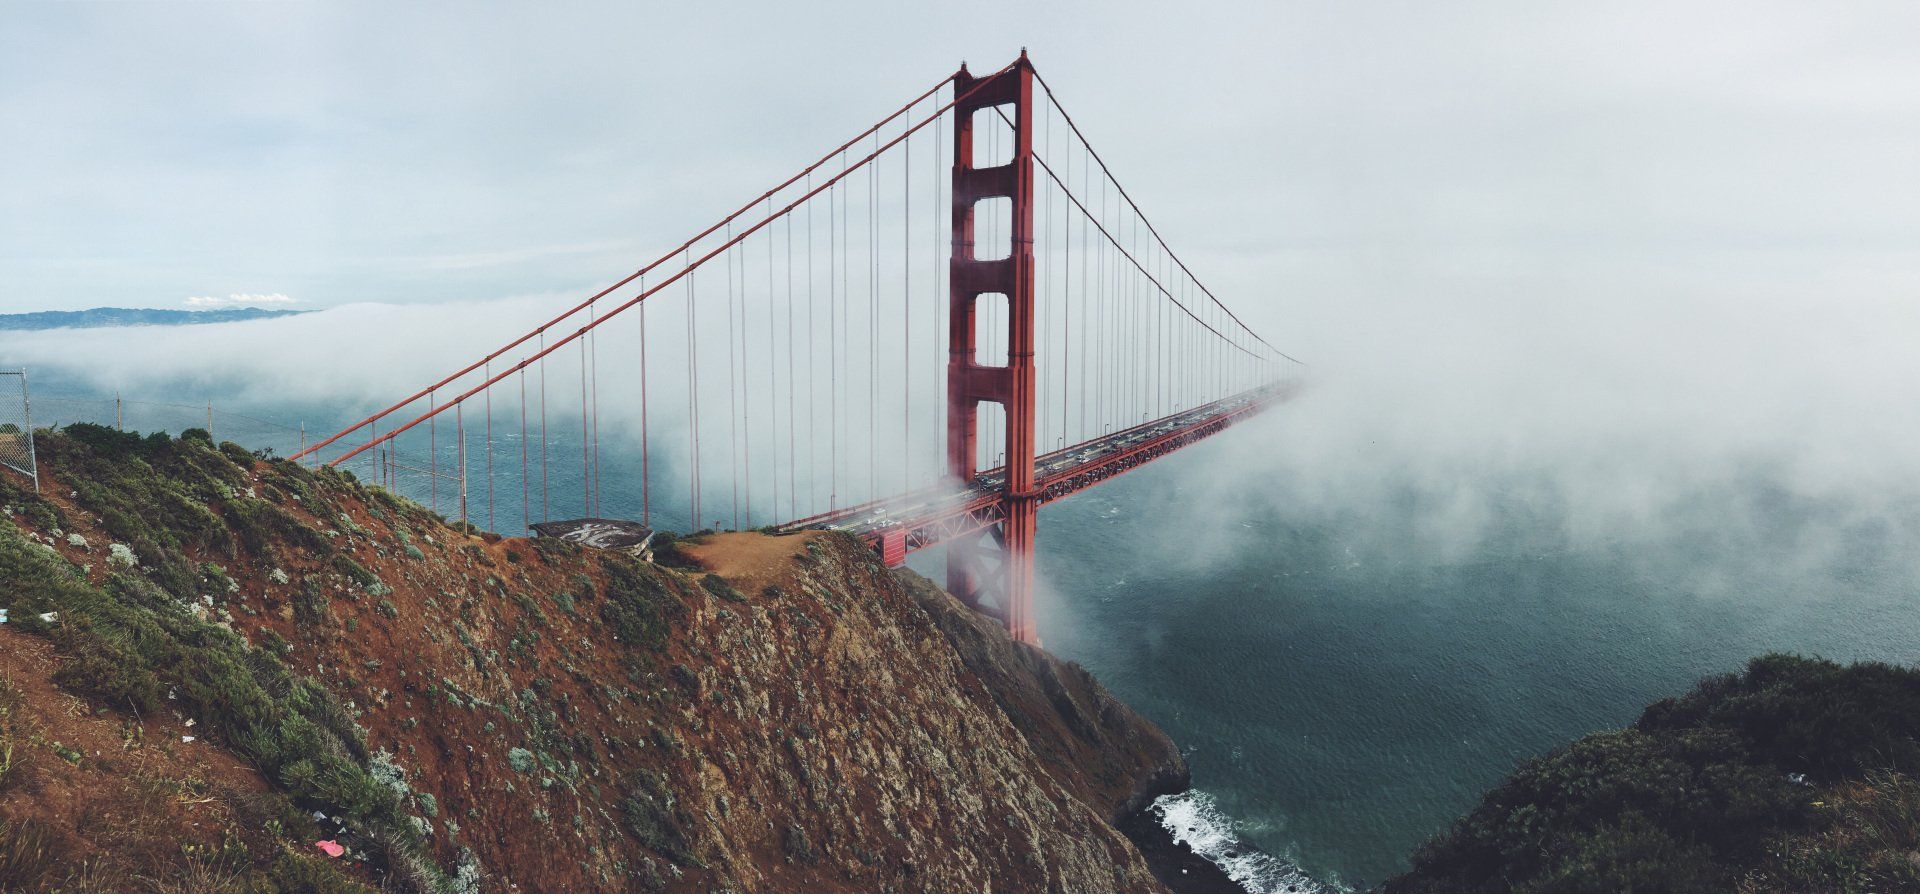 The golden gate bridge is surrounded by fog on a cloudy day.